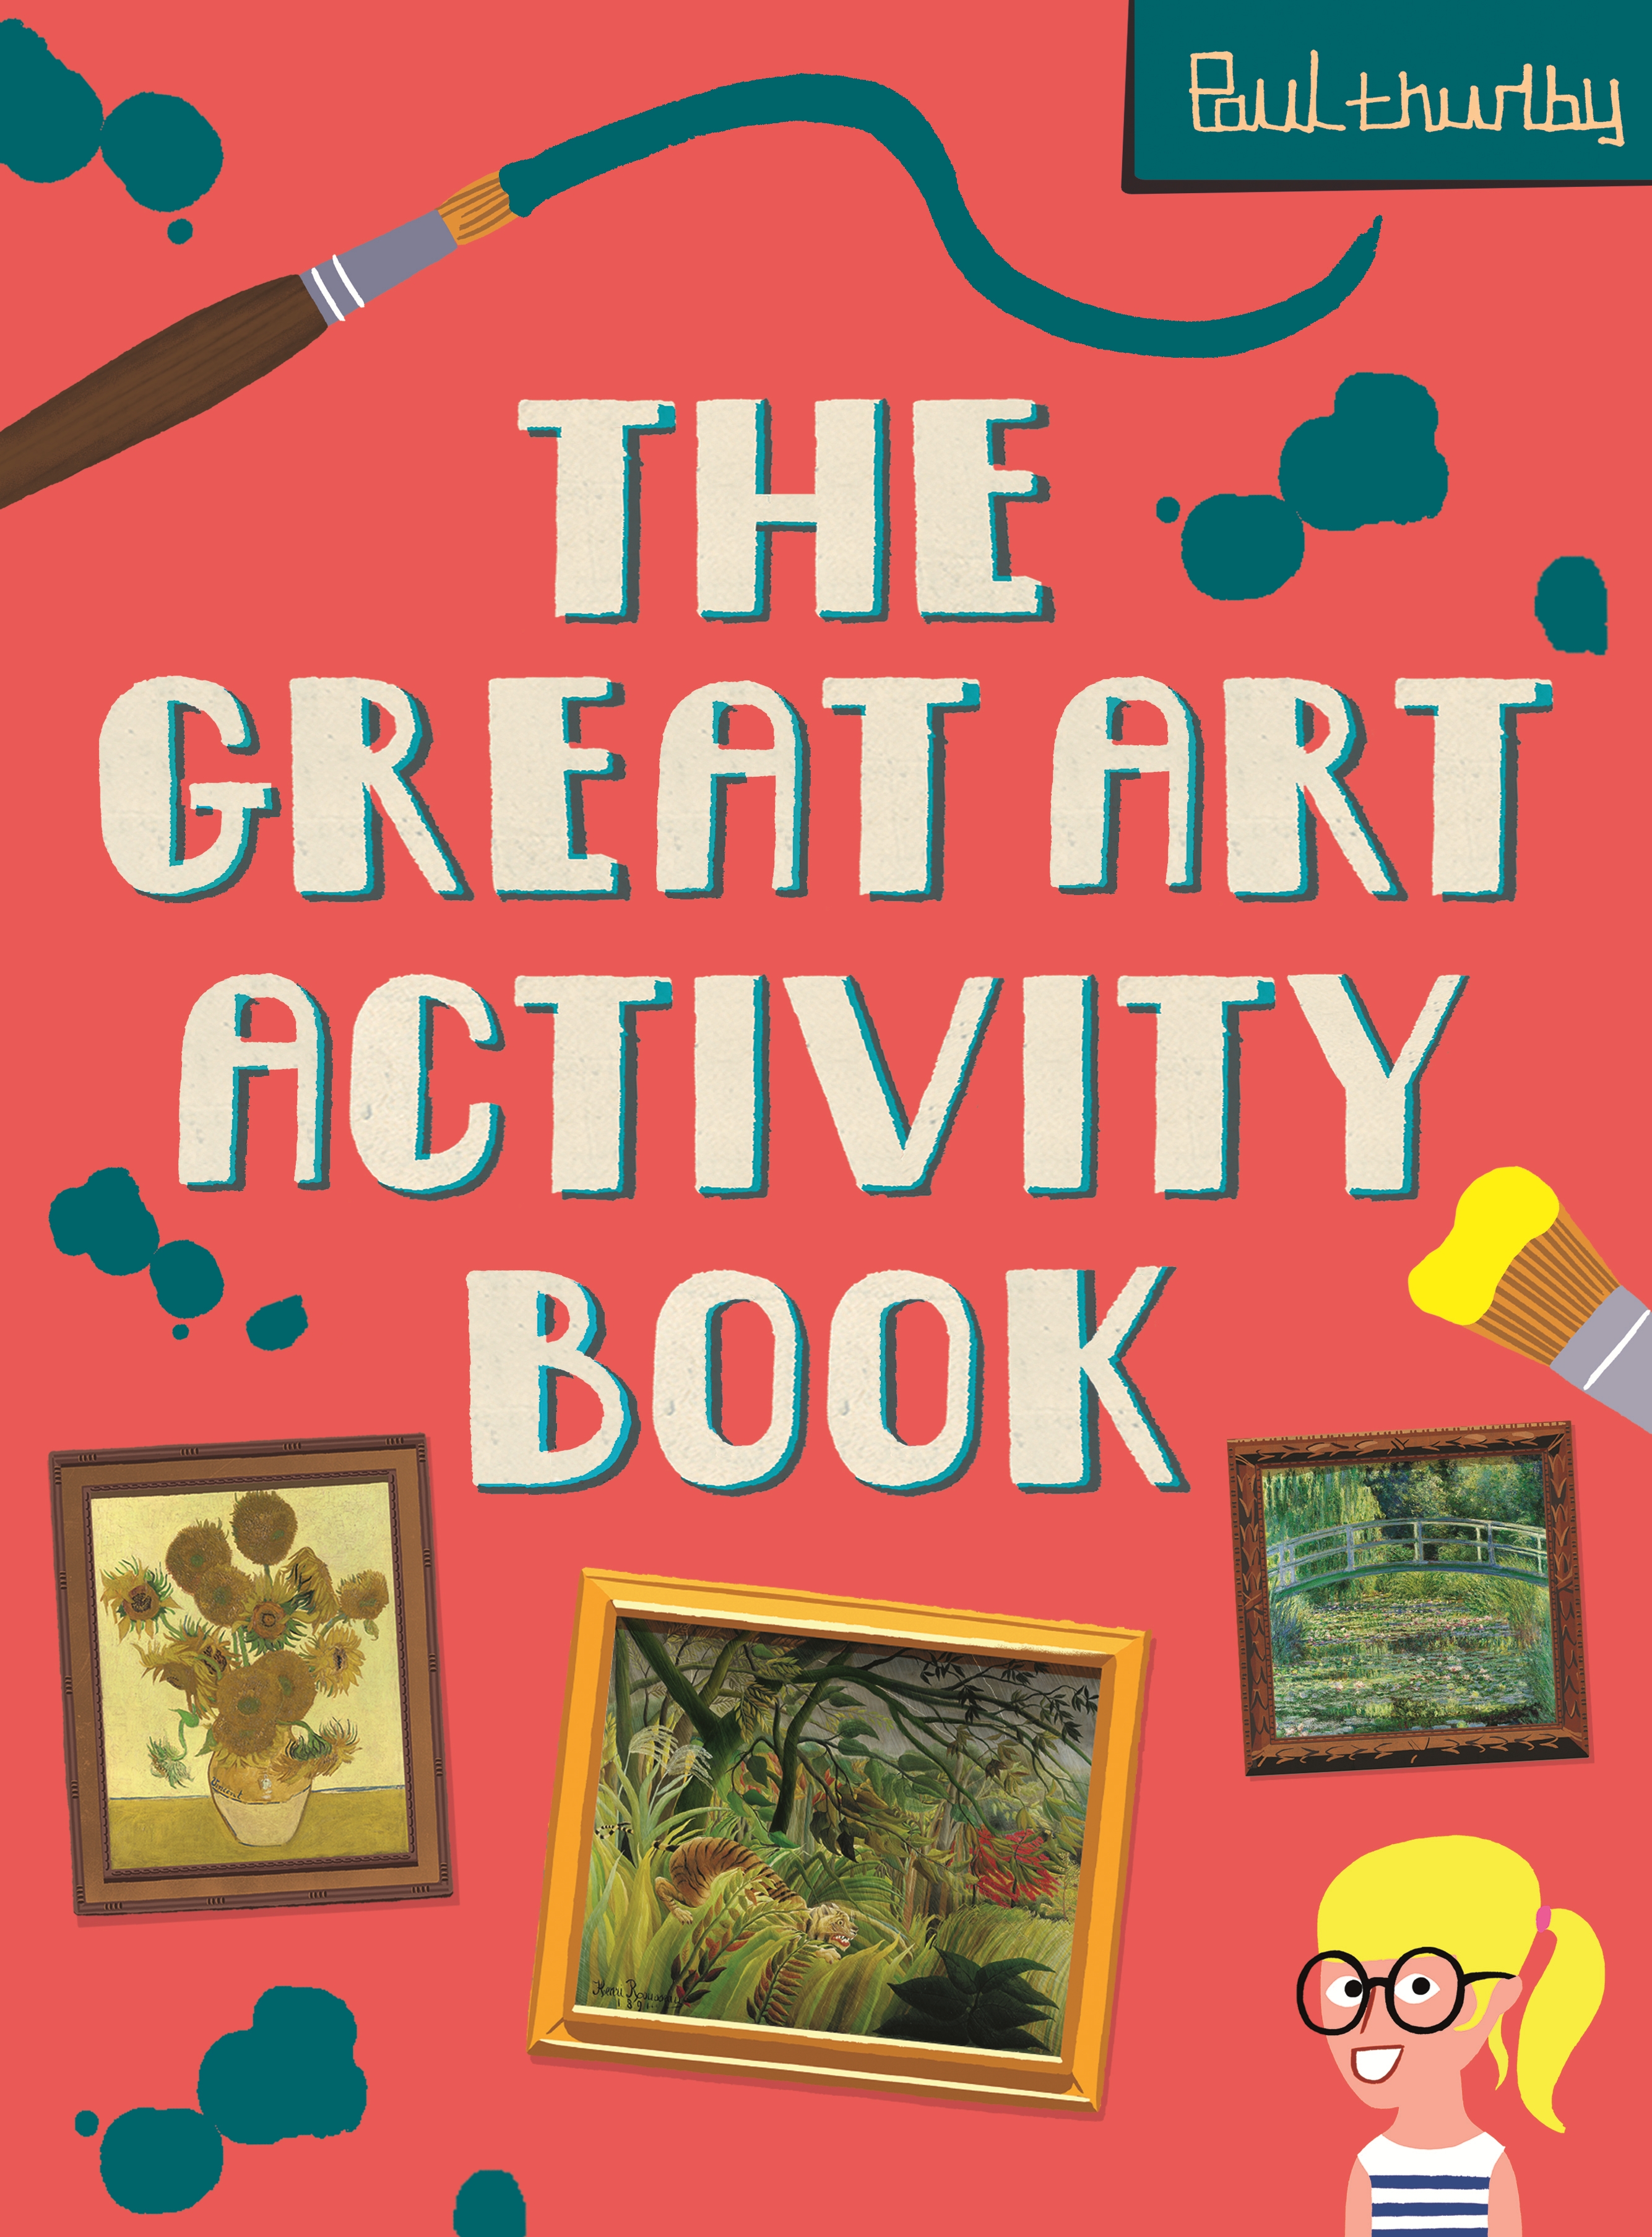 The Great Art Activity Book by Paul Thurlby | Hachette Childrens UK